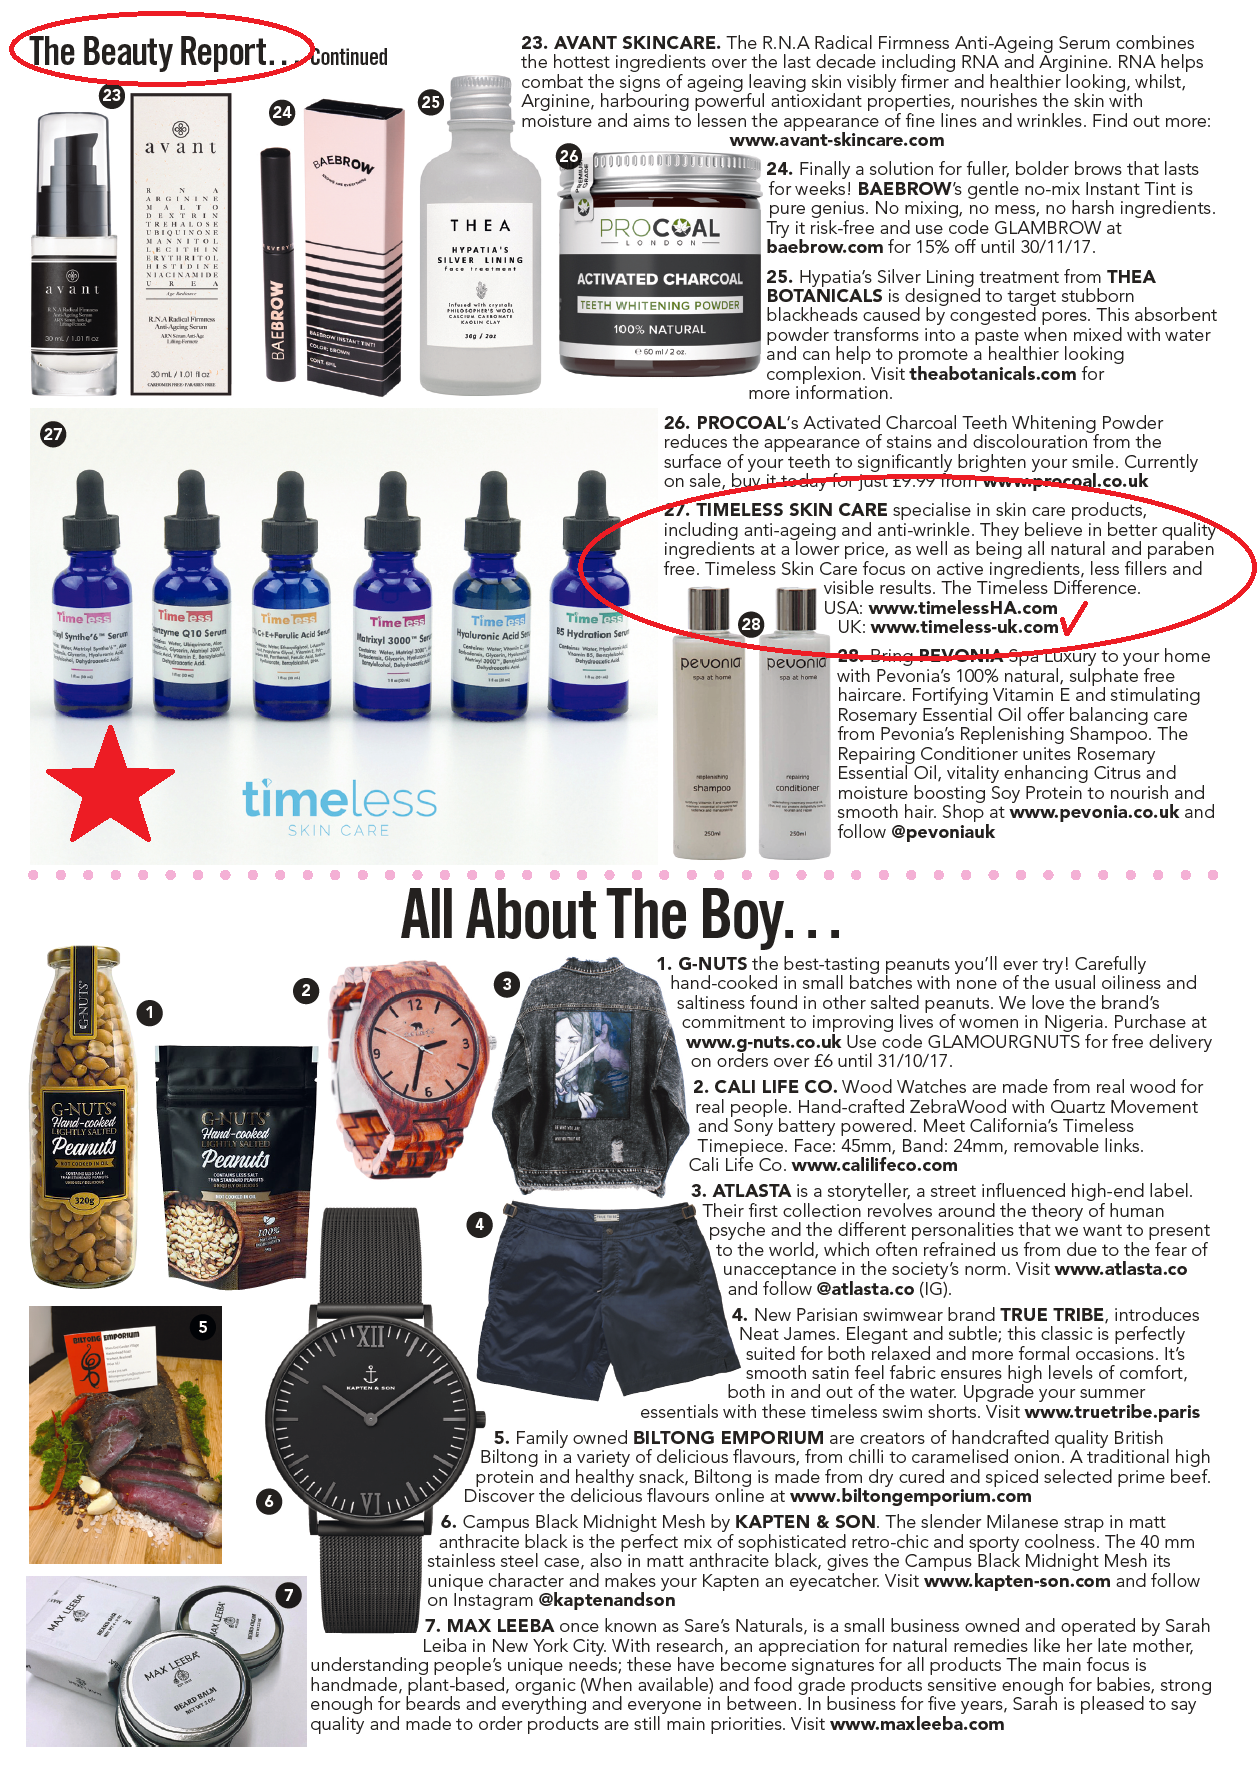 Timeless UK is in the Glamour magazine's October Beauty report! Check it out!